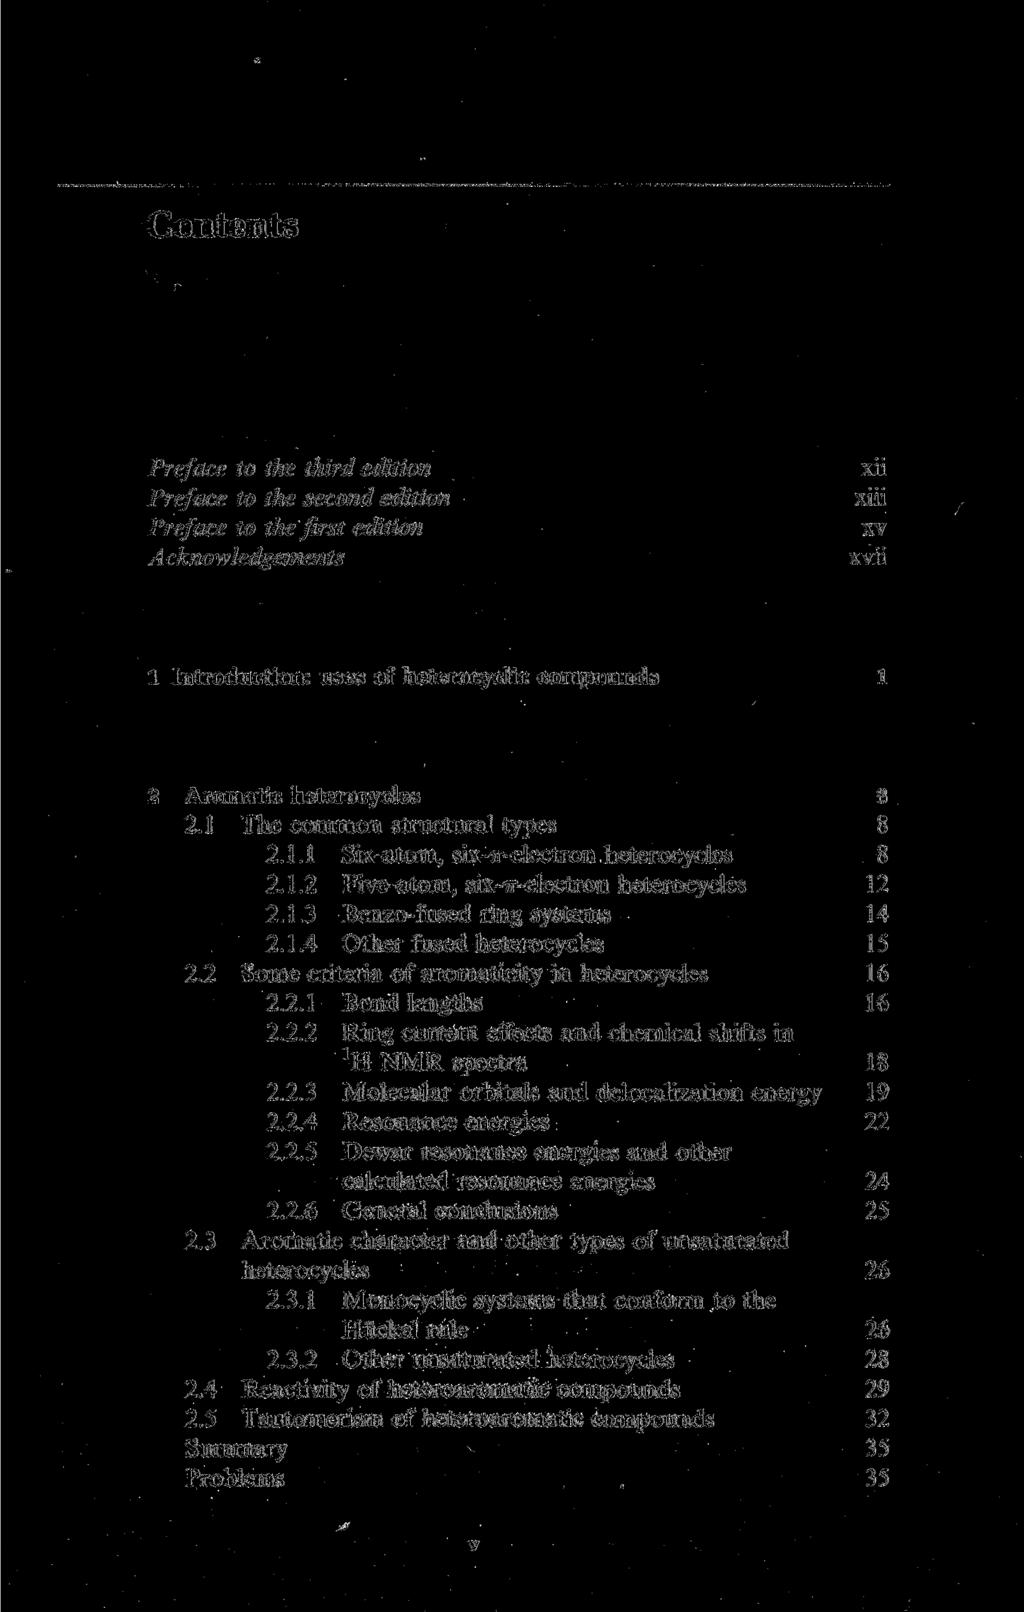 Contents Preface to the third edition Preface to the second edition Preface to the first edition Acknowledgements xii xiii xv xvii 1 Introduction: uses of heterocyclic Compounds Aromatic heterocycles